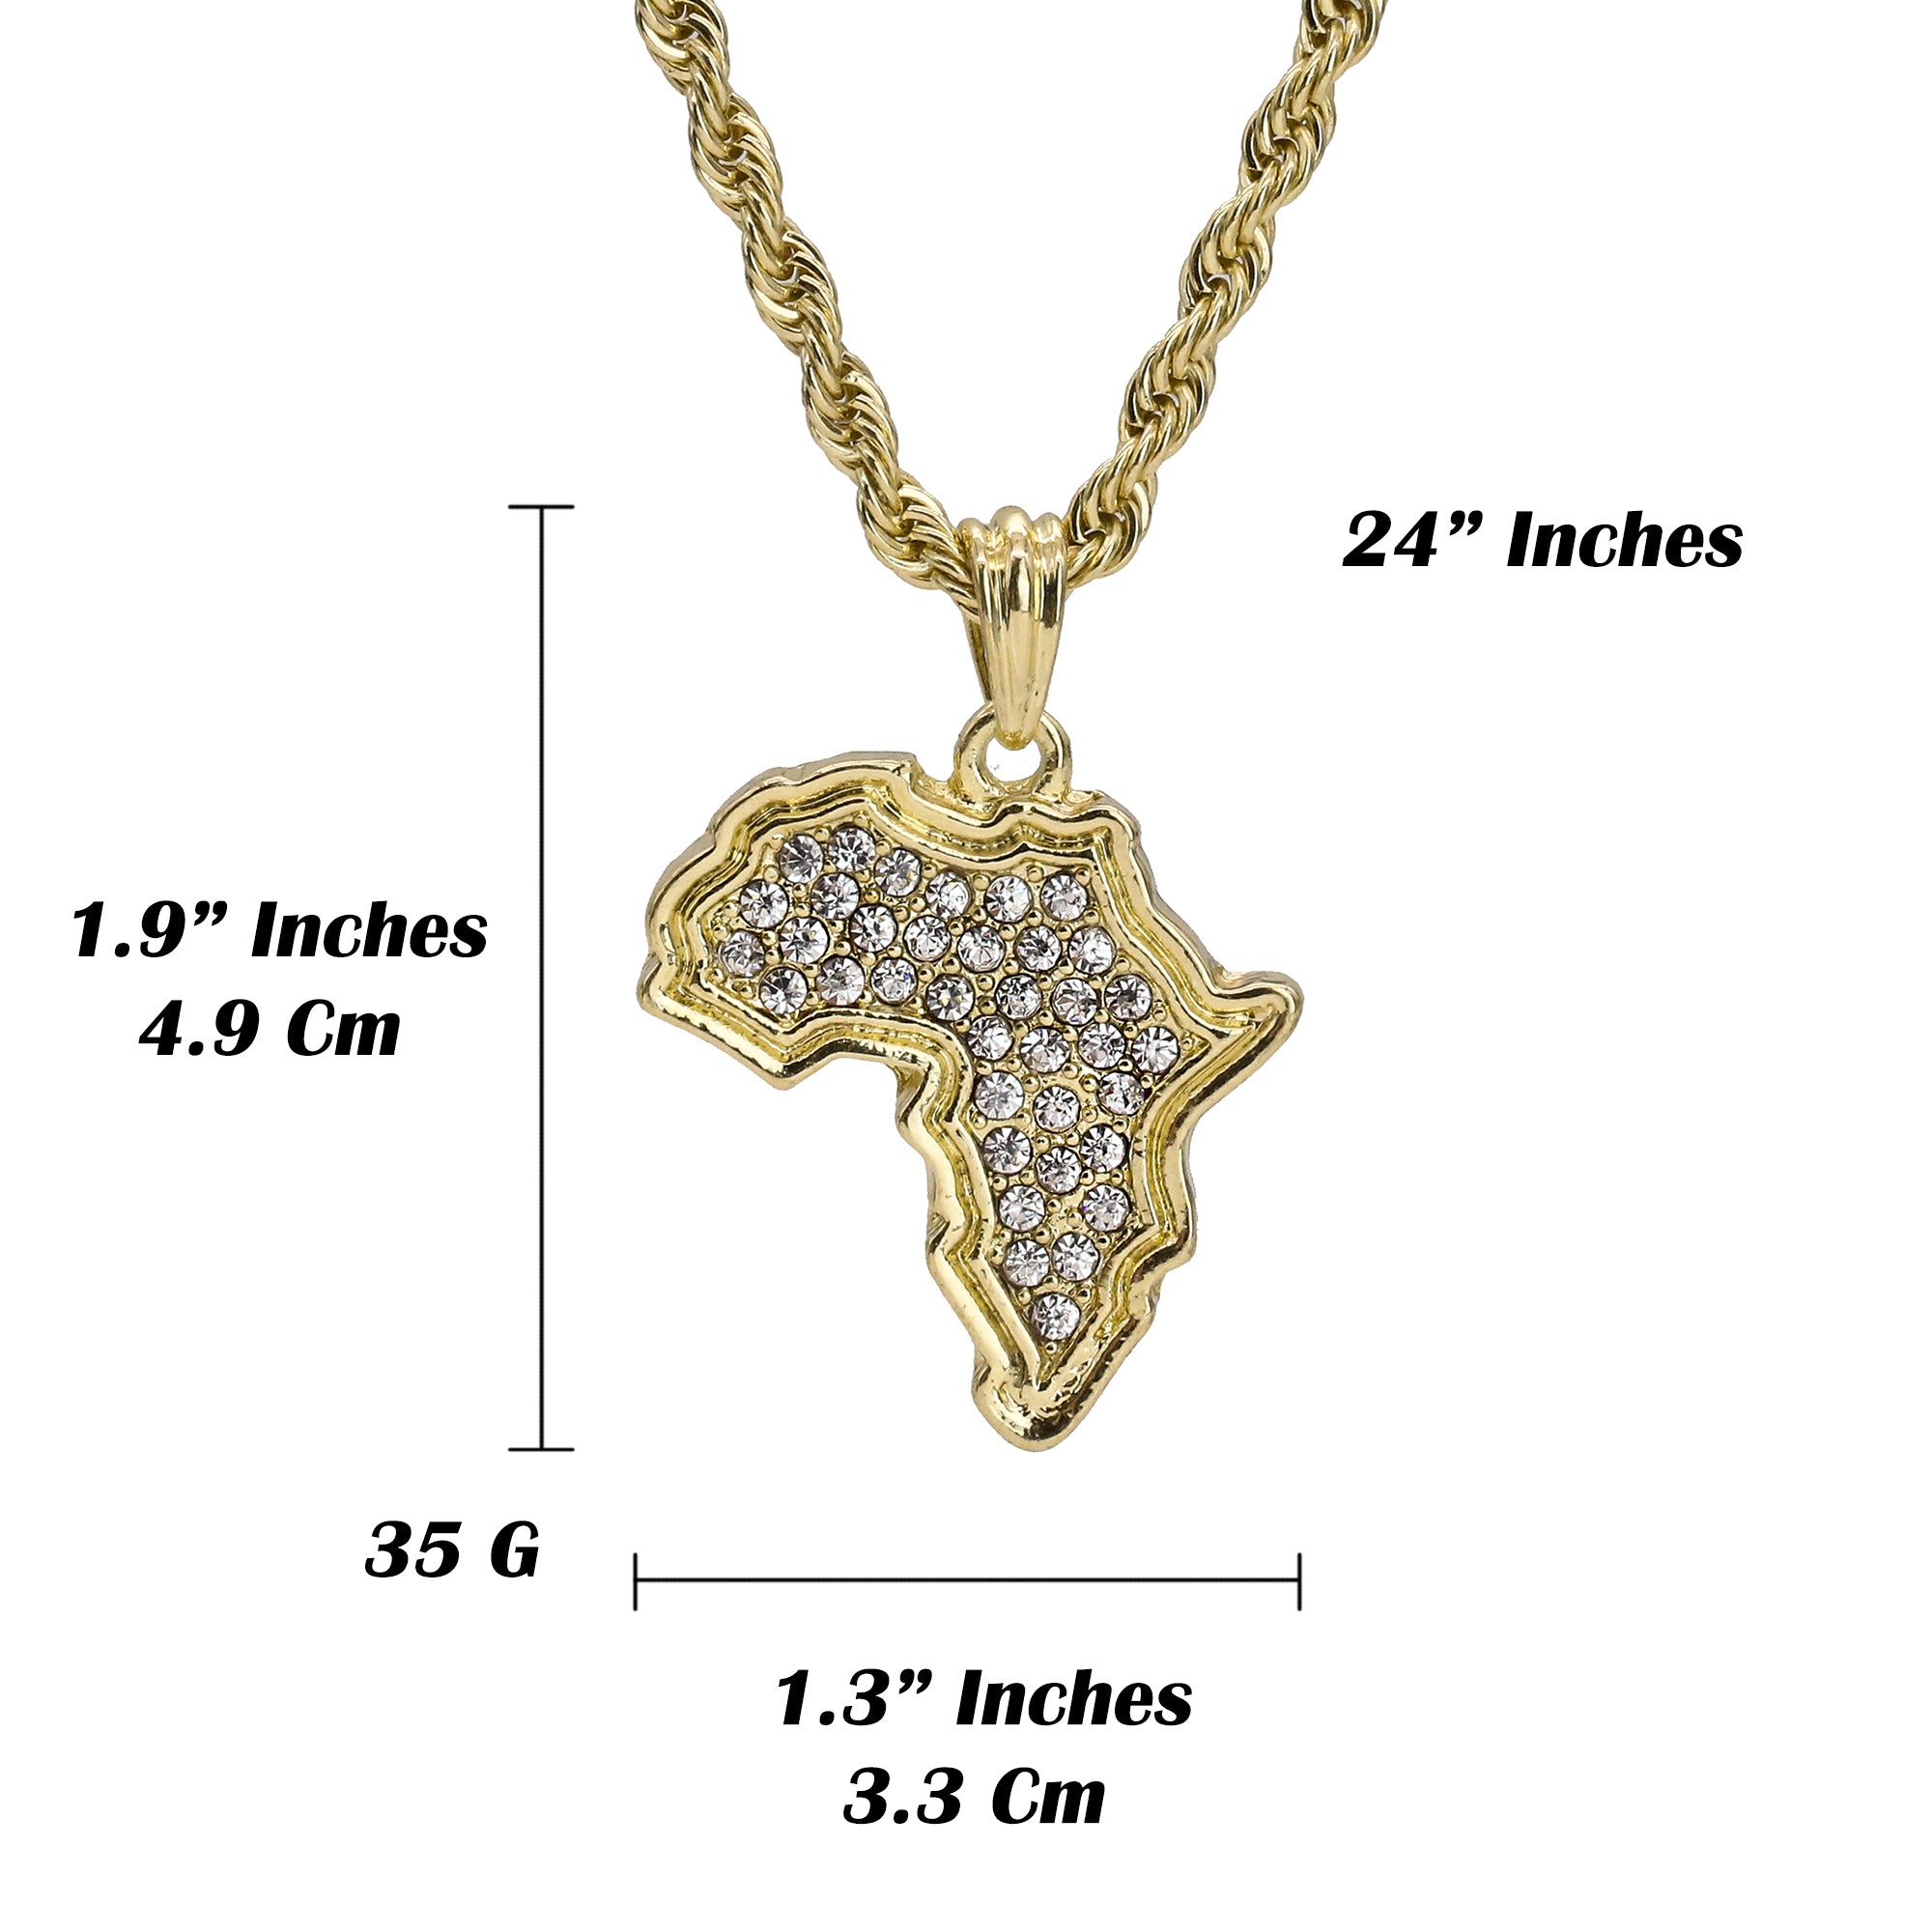 Cz Africa Pendant 18K 24" Rope Chain Hip Hop Jewelry